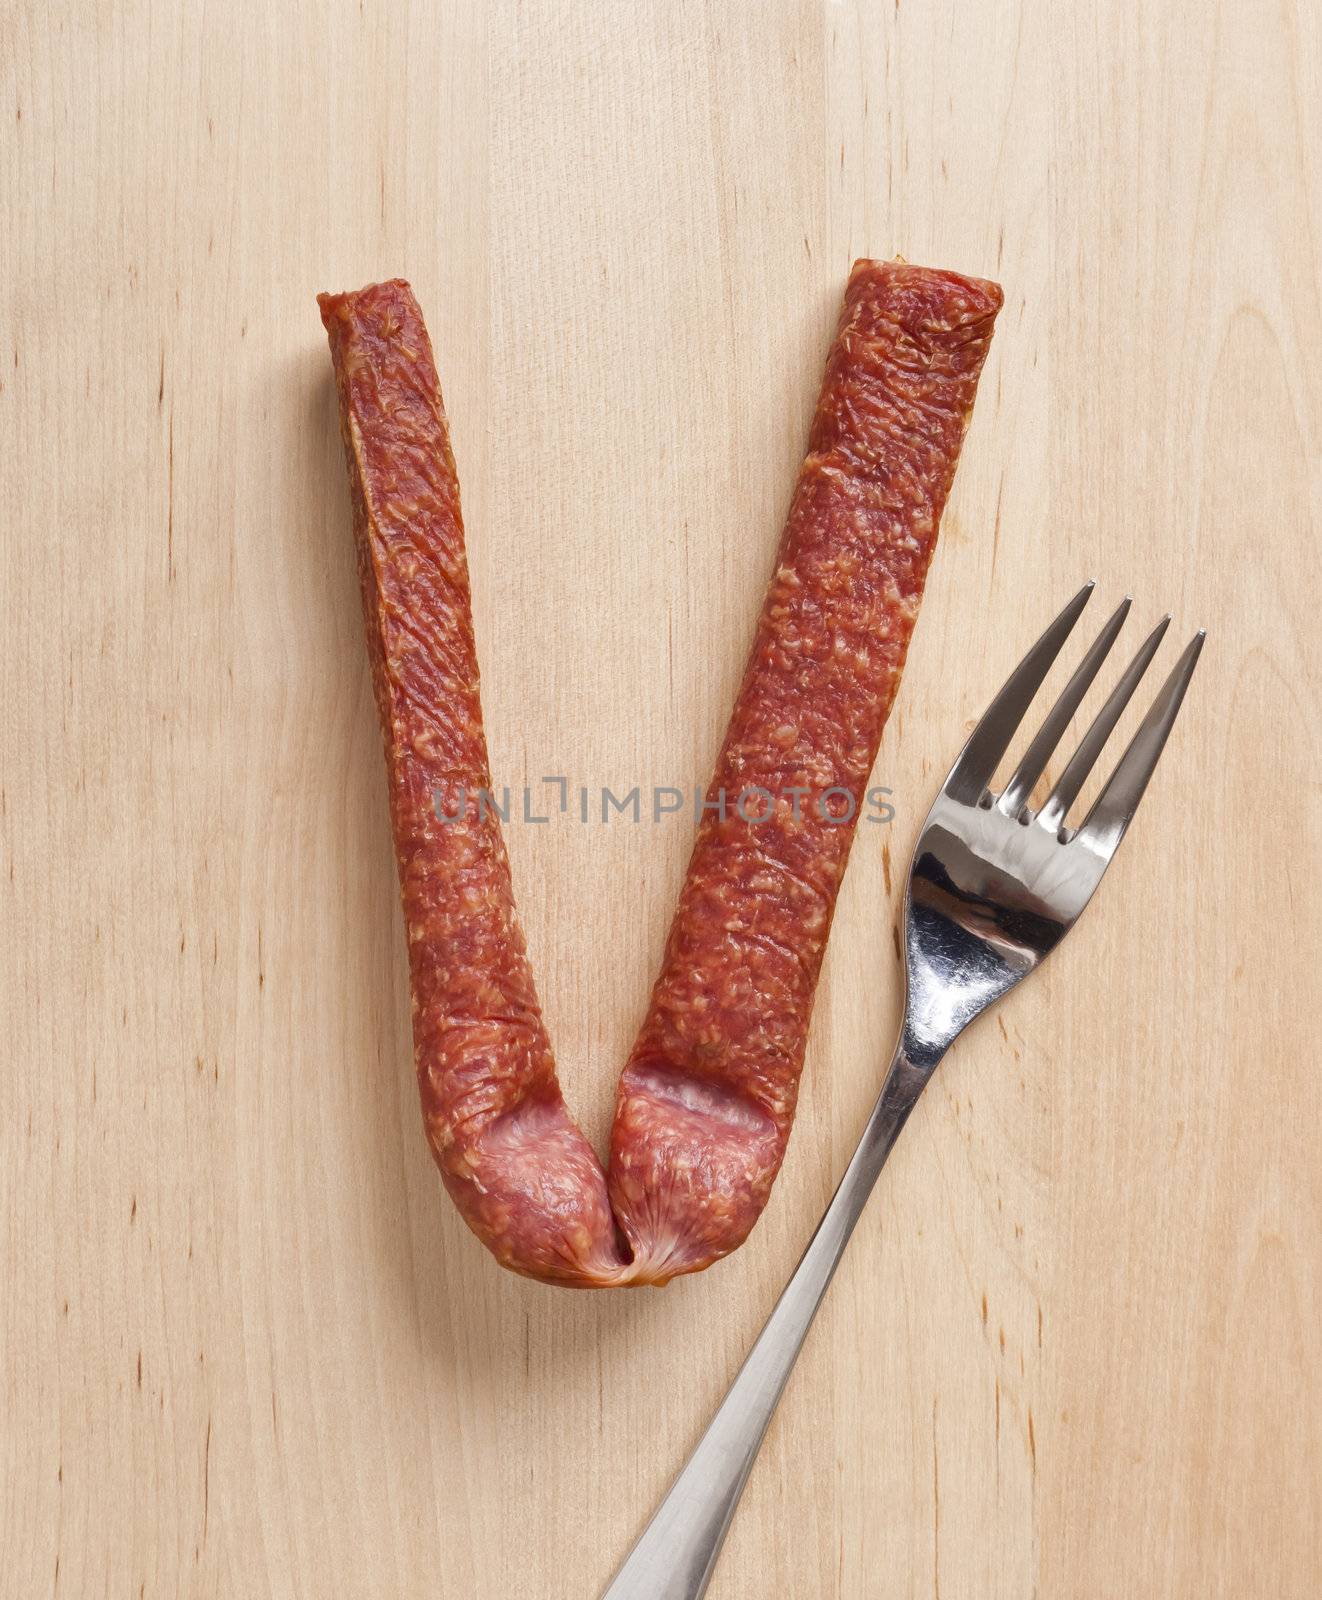 An image of a german sausage and a fork